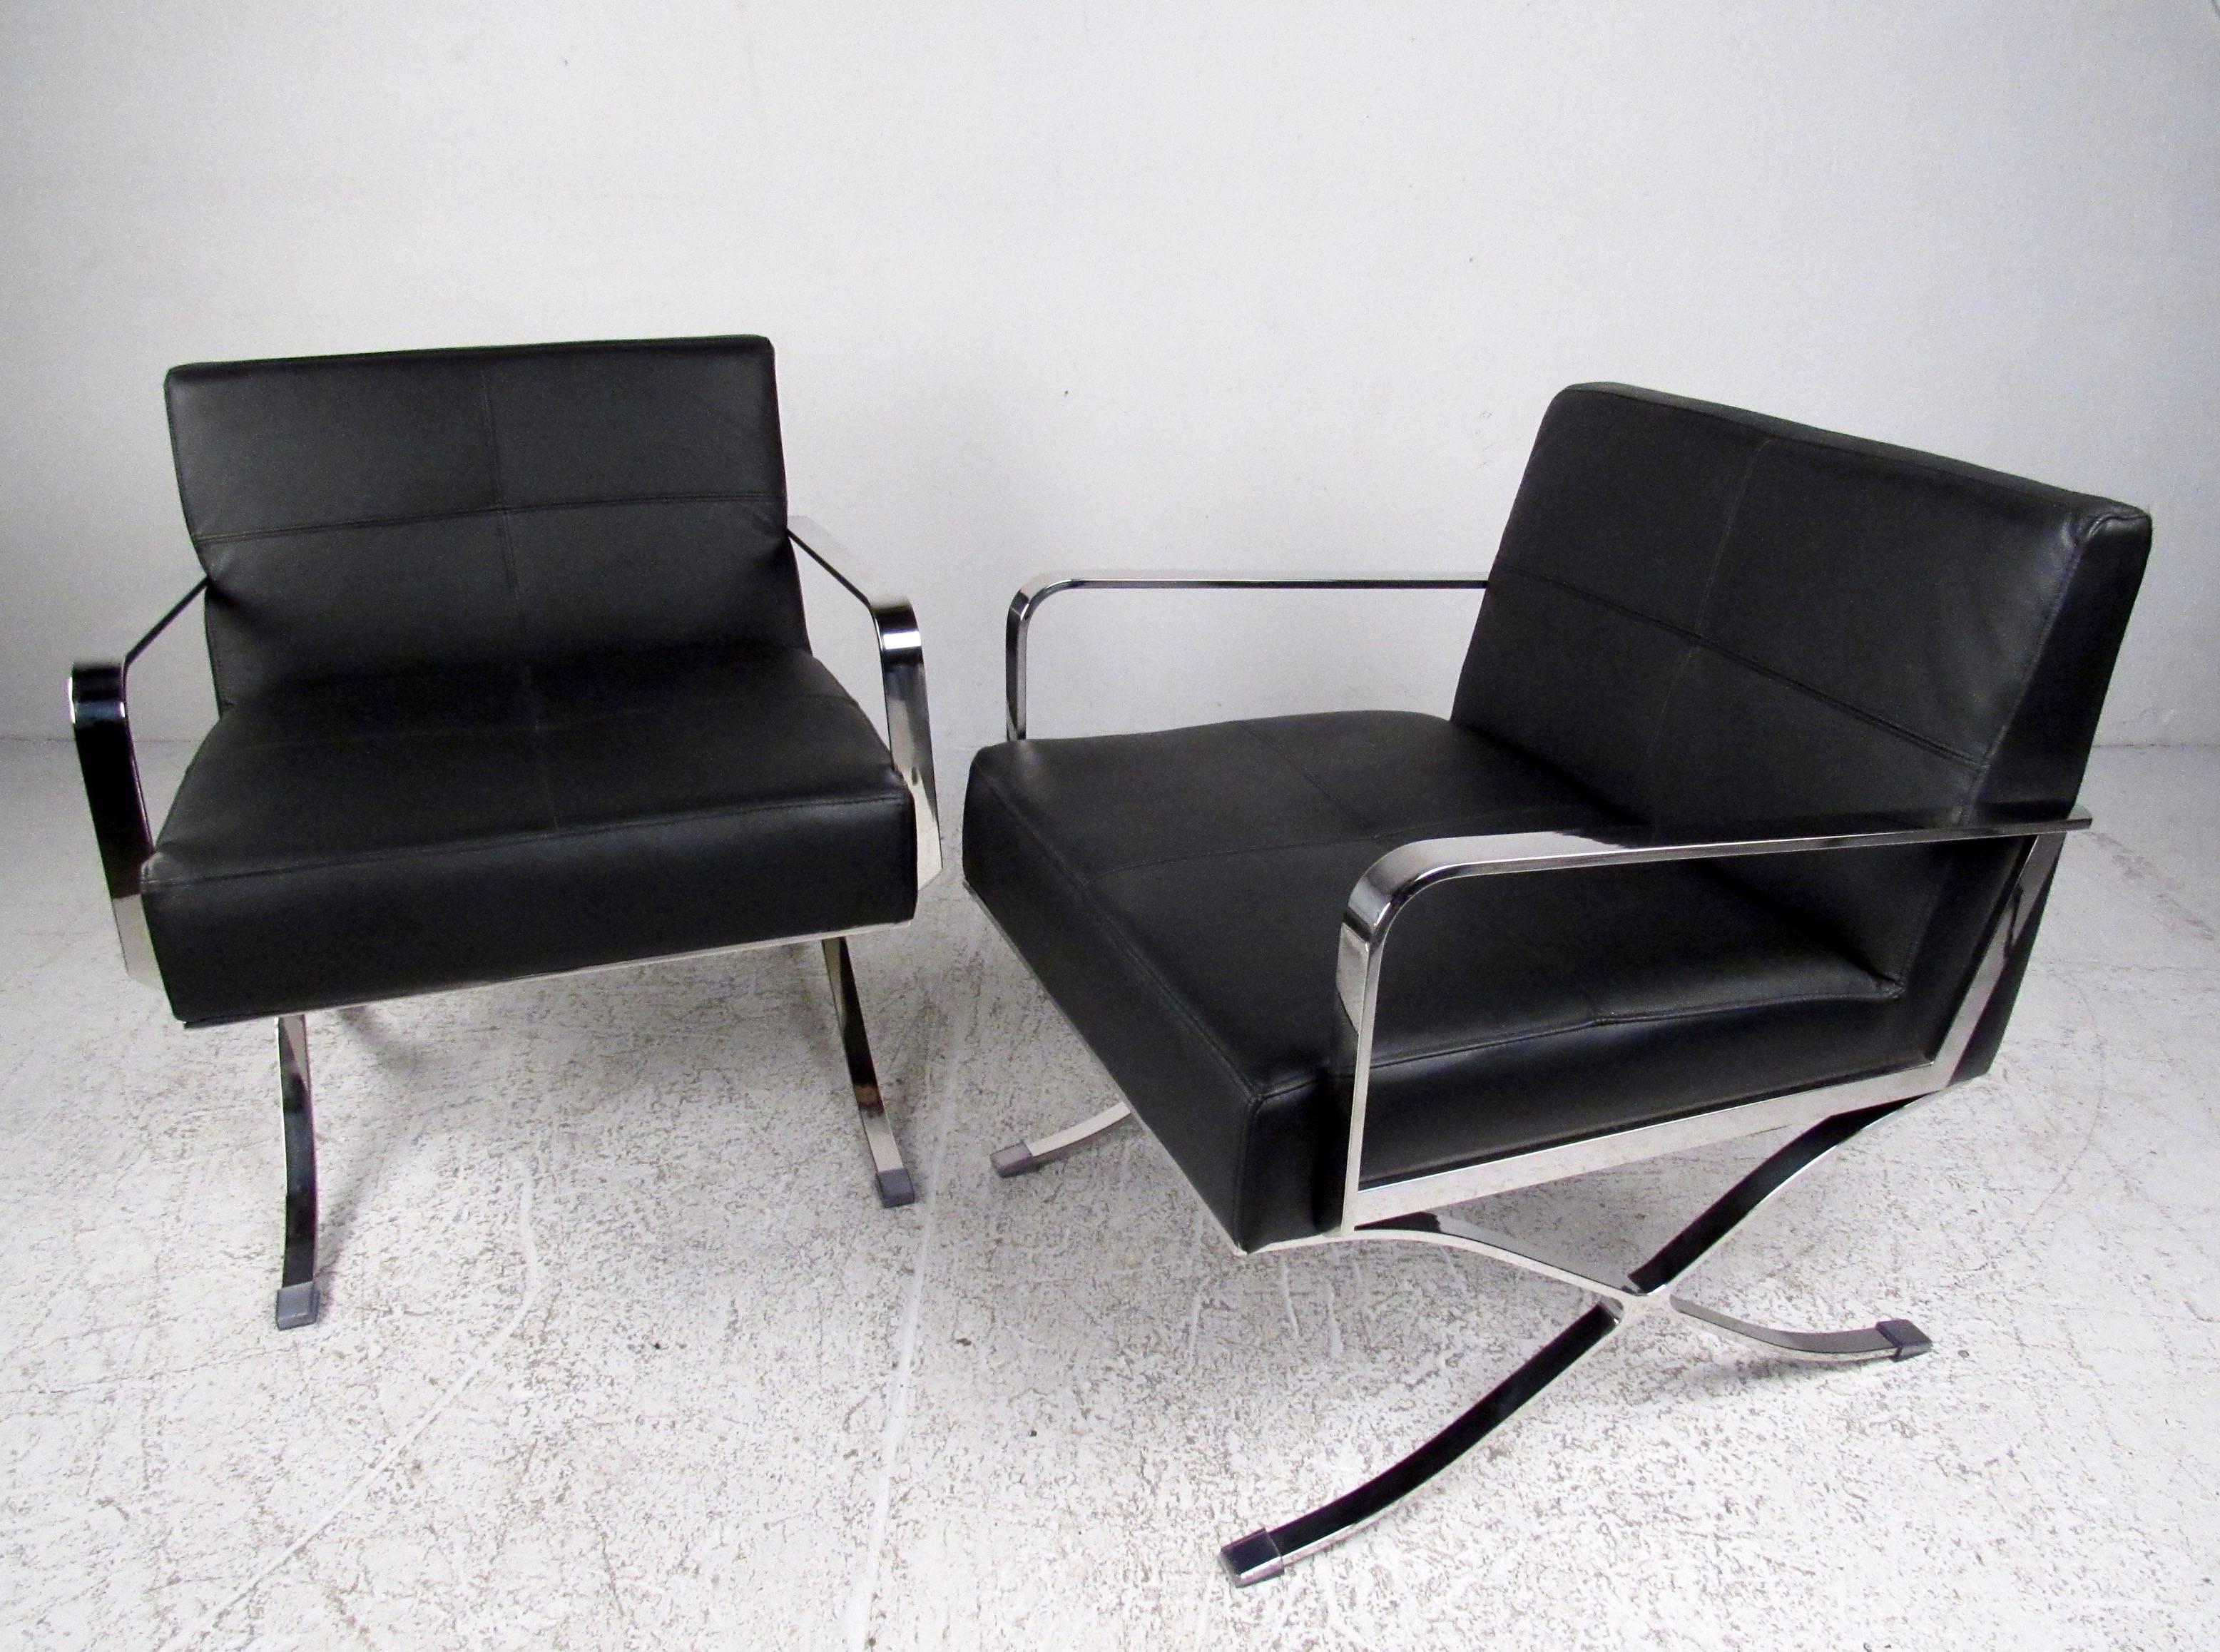 Midcentury style and elegant simplicity make this matched pair of contemporary modern armchairs a striking addition to home or business seating. Features heavy flat-bar chrome chairs with stylish X-style base. Please confirm item location (NY or NJ).